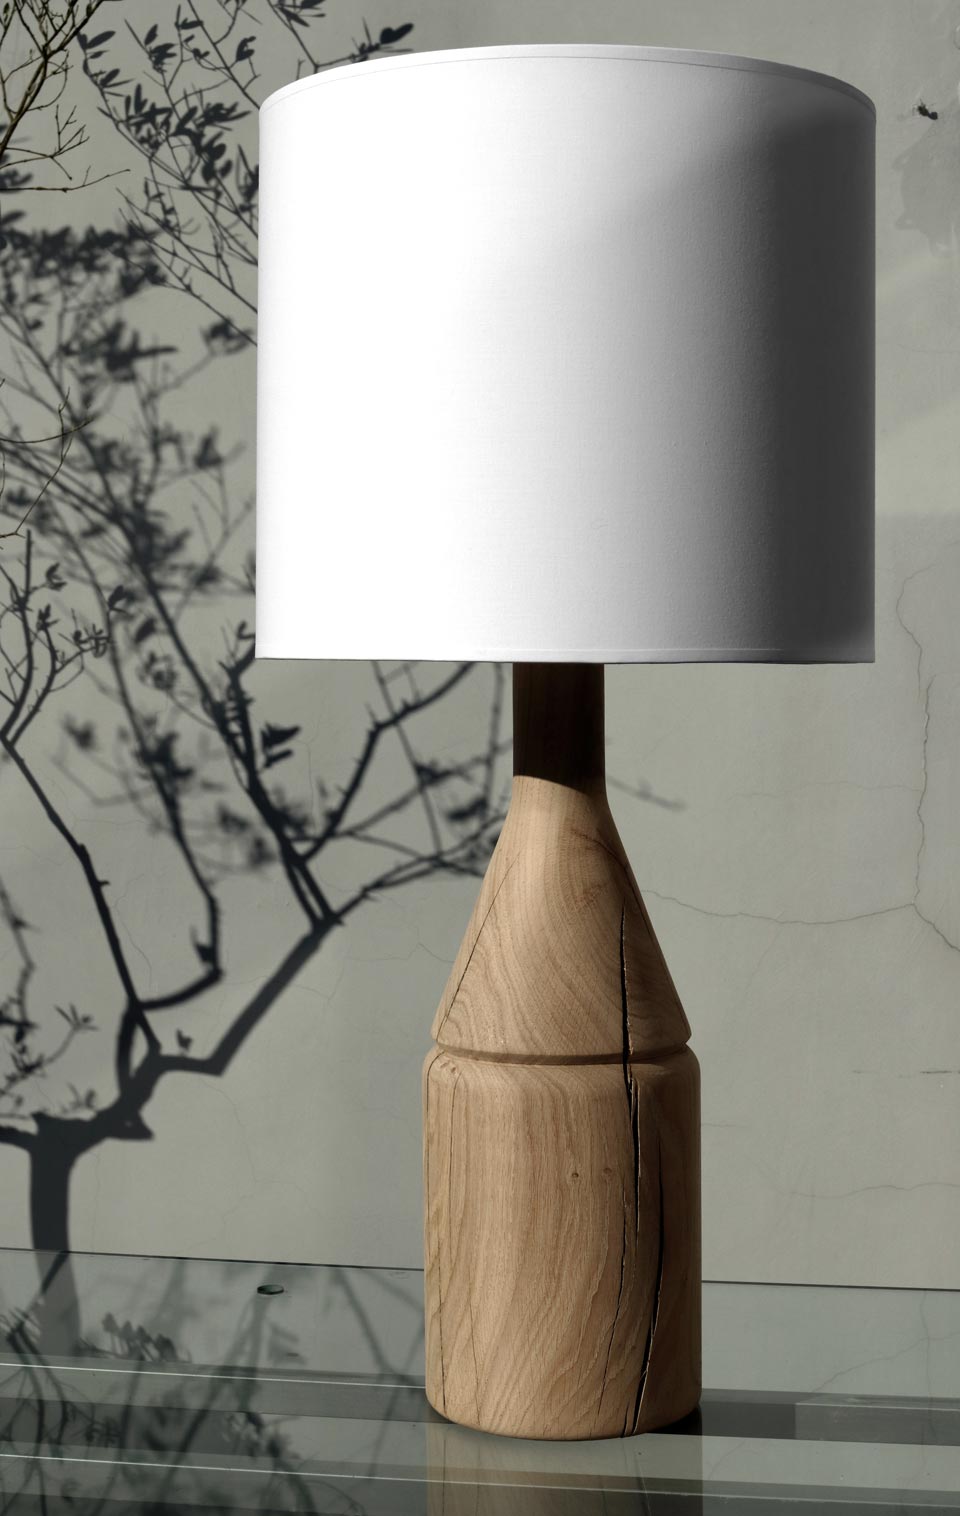 Anna beautiful lamp in solid oak and white shade. Hind Rabii. 